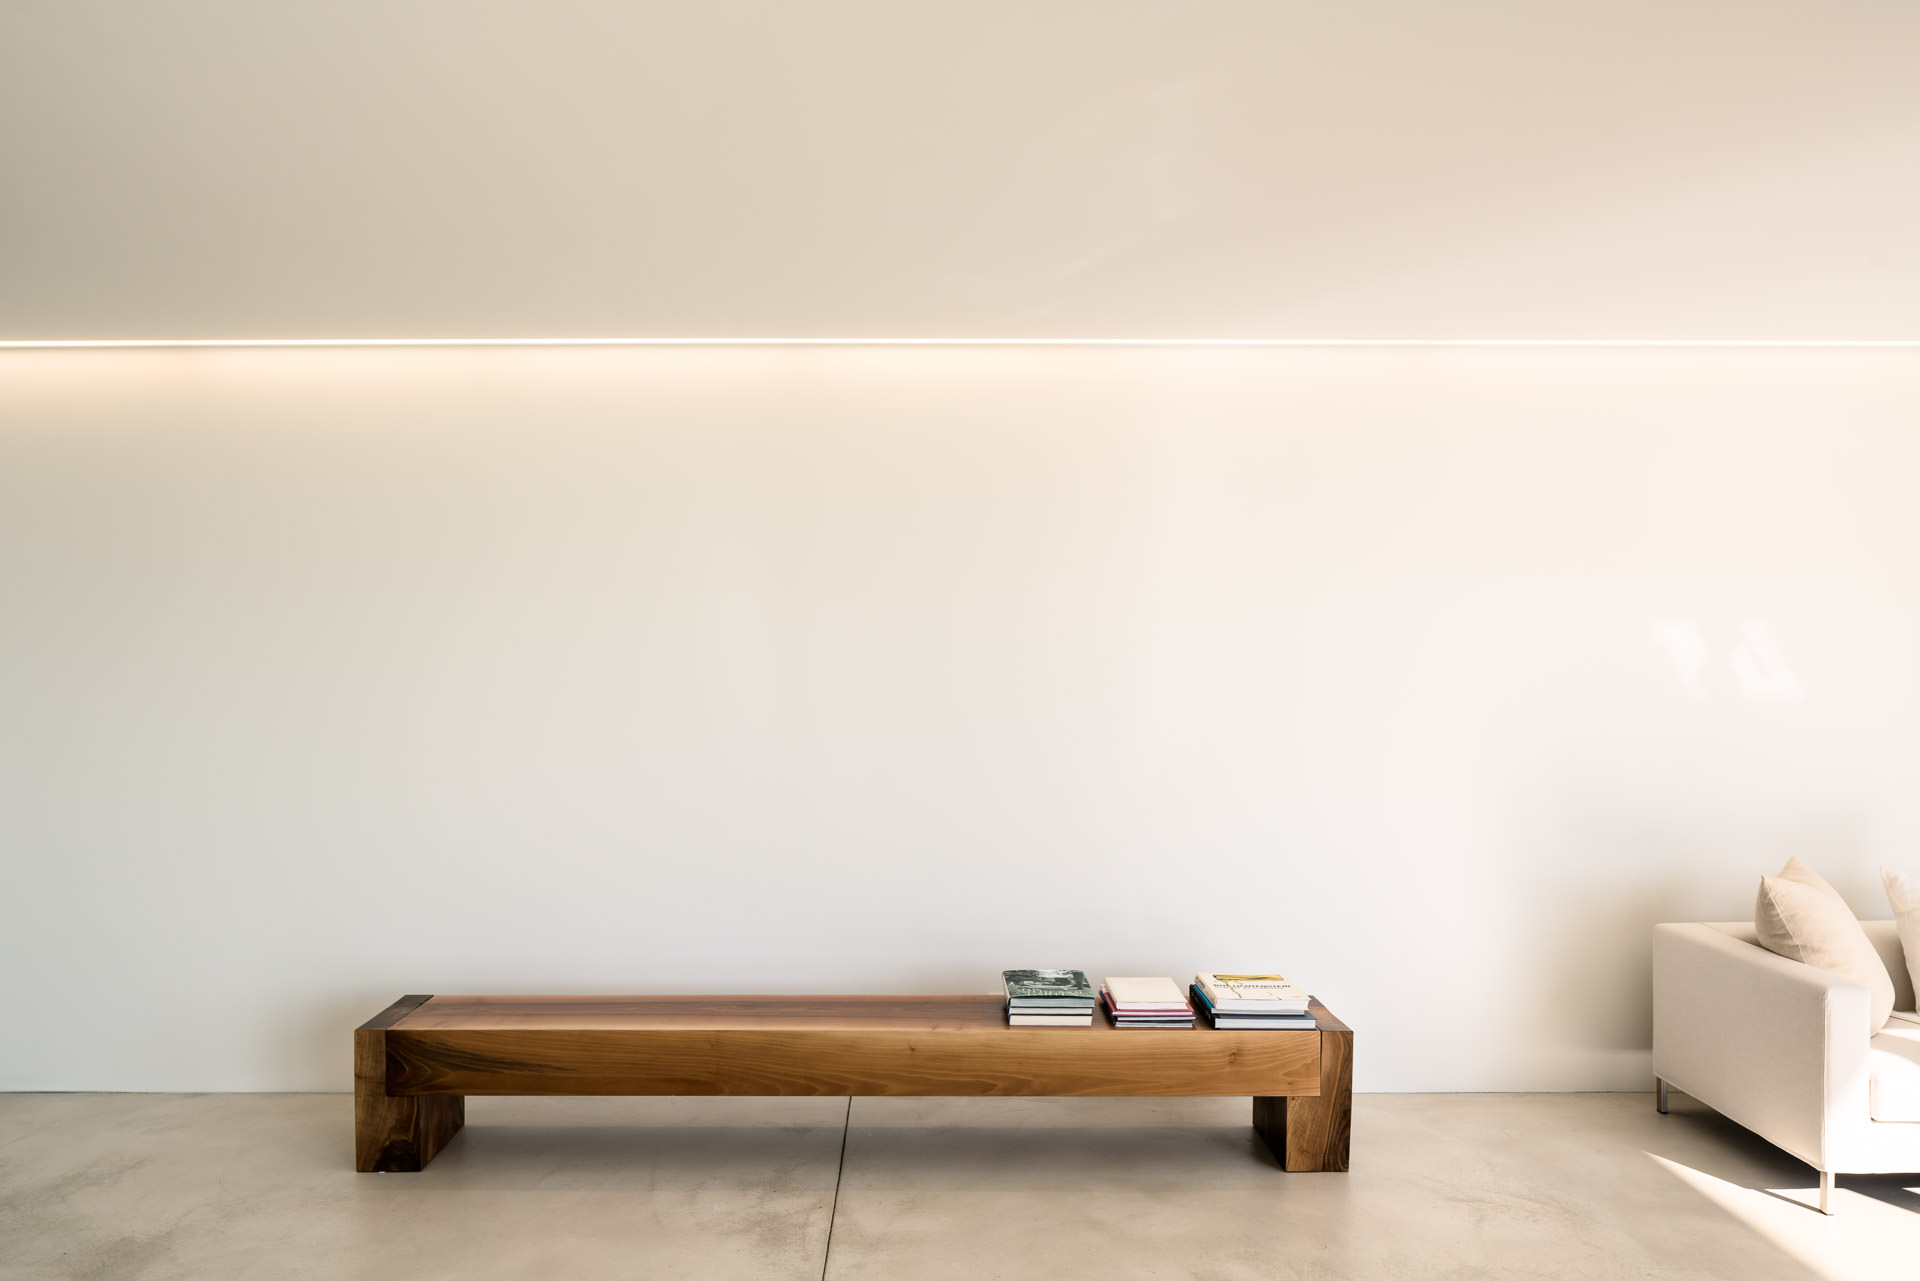 Interior Design Photography - braun wooden bench and books